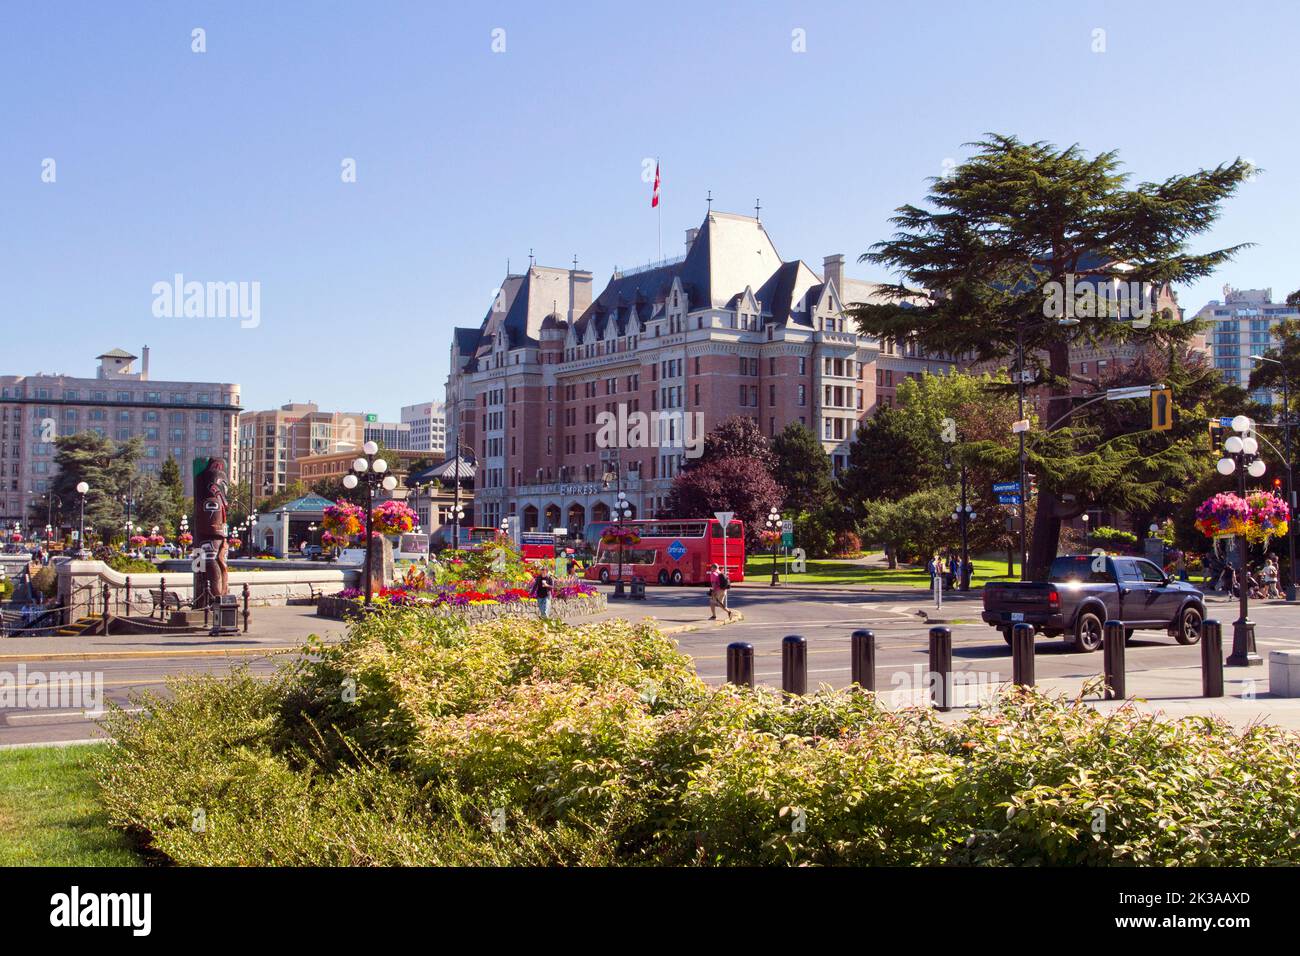 A scenic view of the Fairmont Empress hotel along Government Street, Victoria, British Columbia, Canada, a National Historic Site of Canada Stock Photo